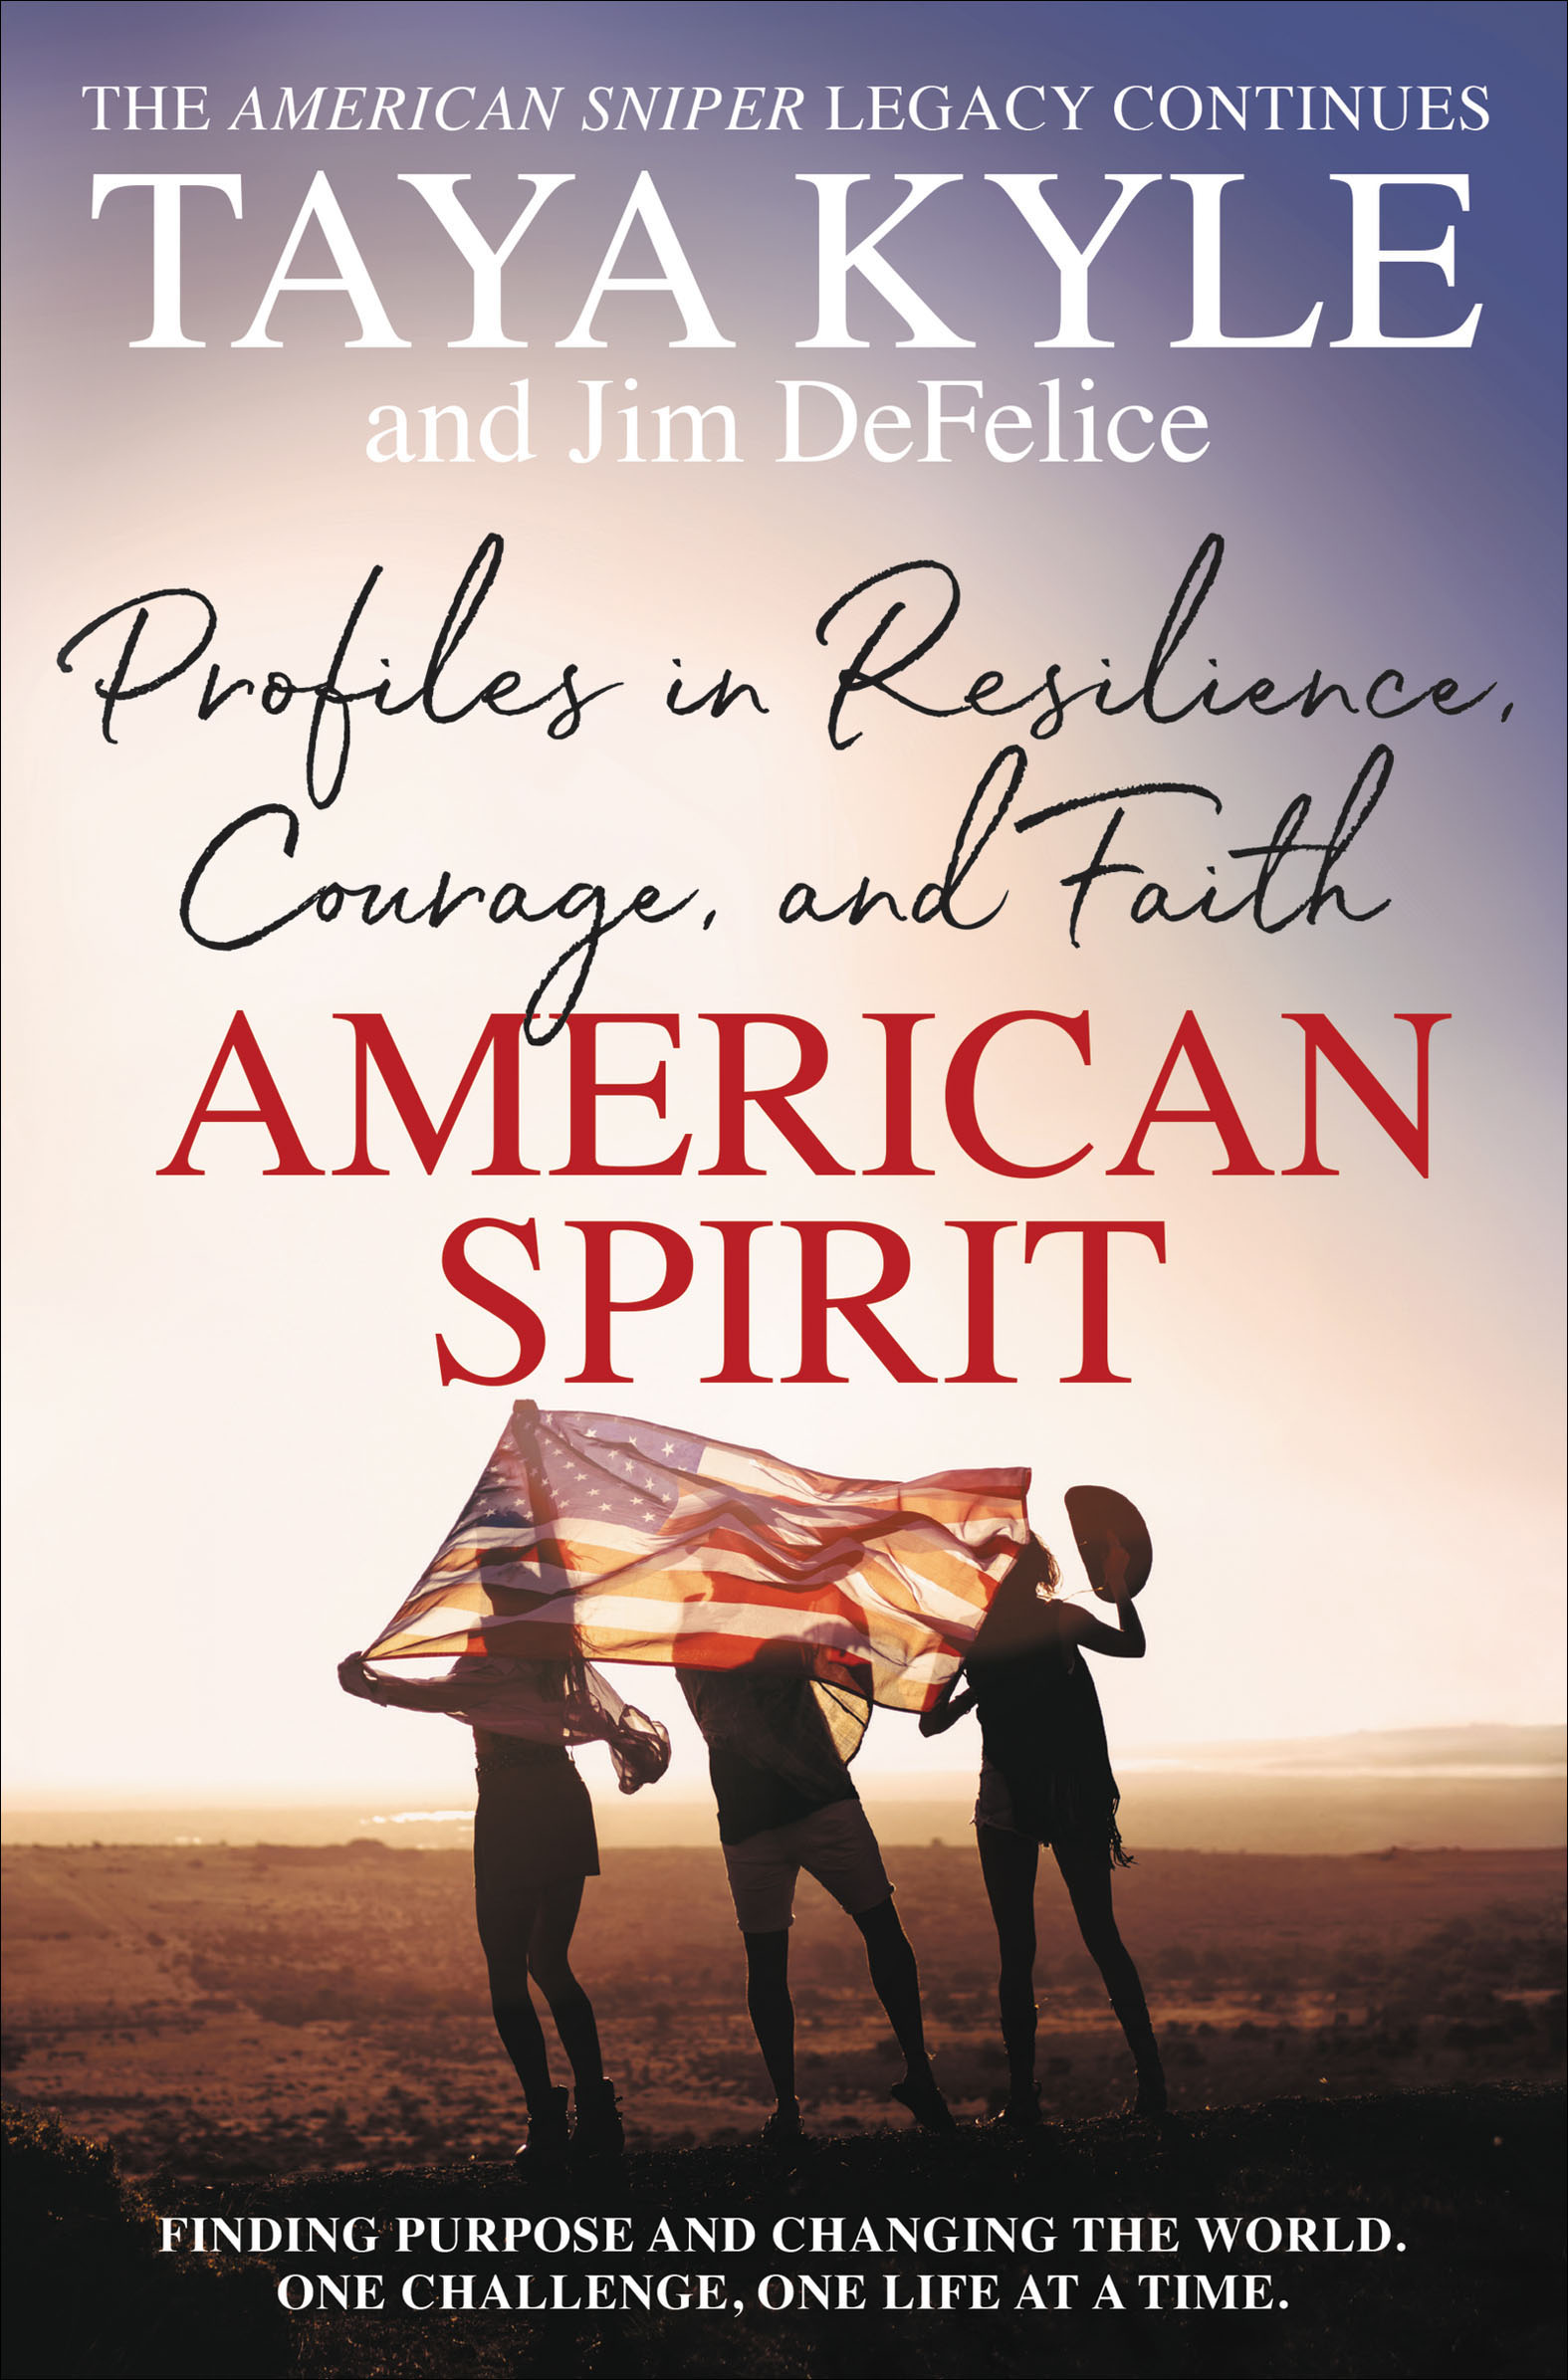 American spirit profiles in resilience, courage, and faith cover image